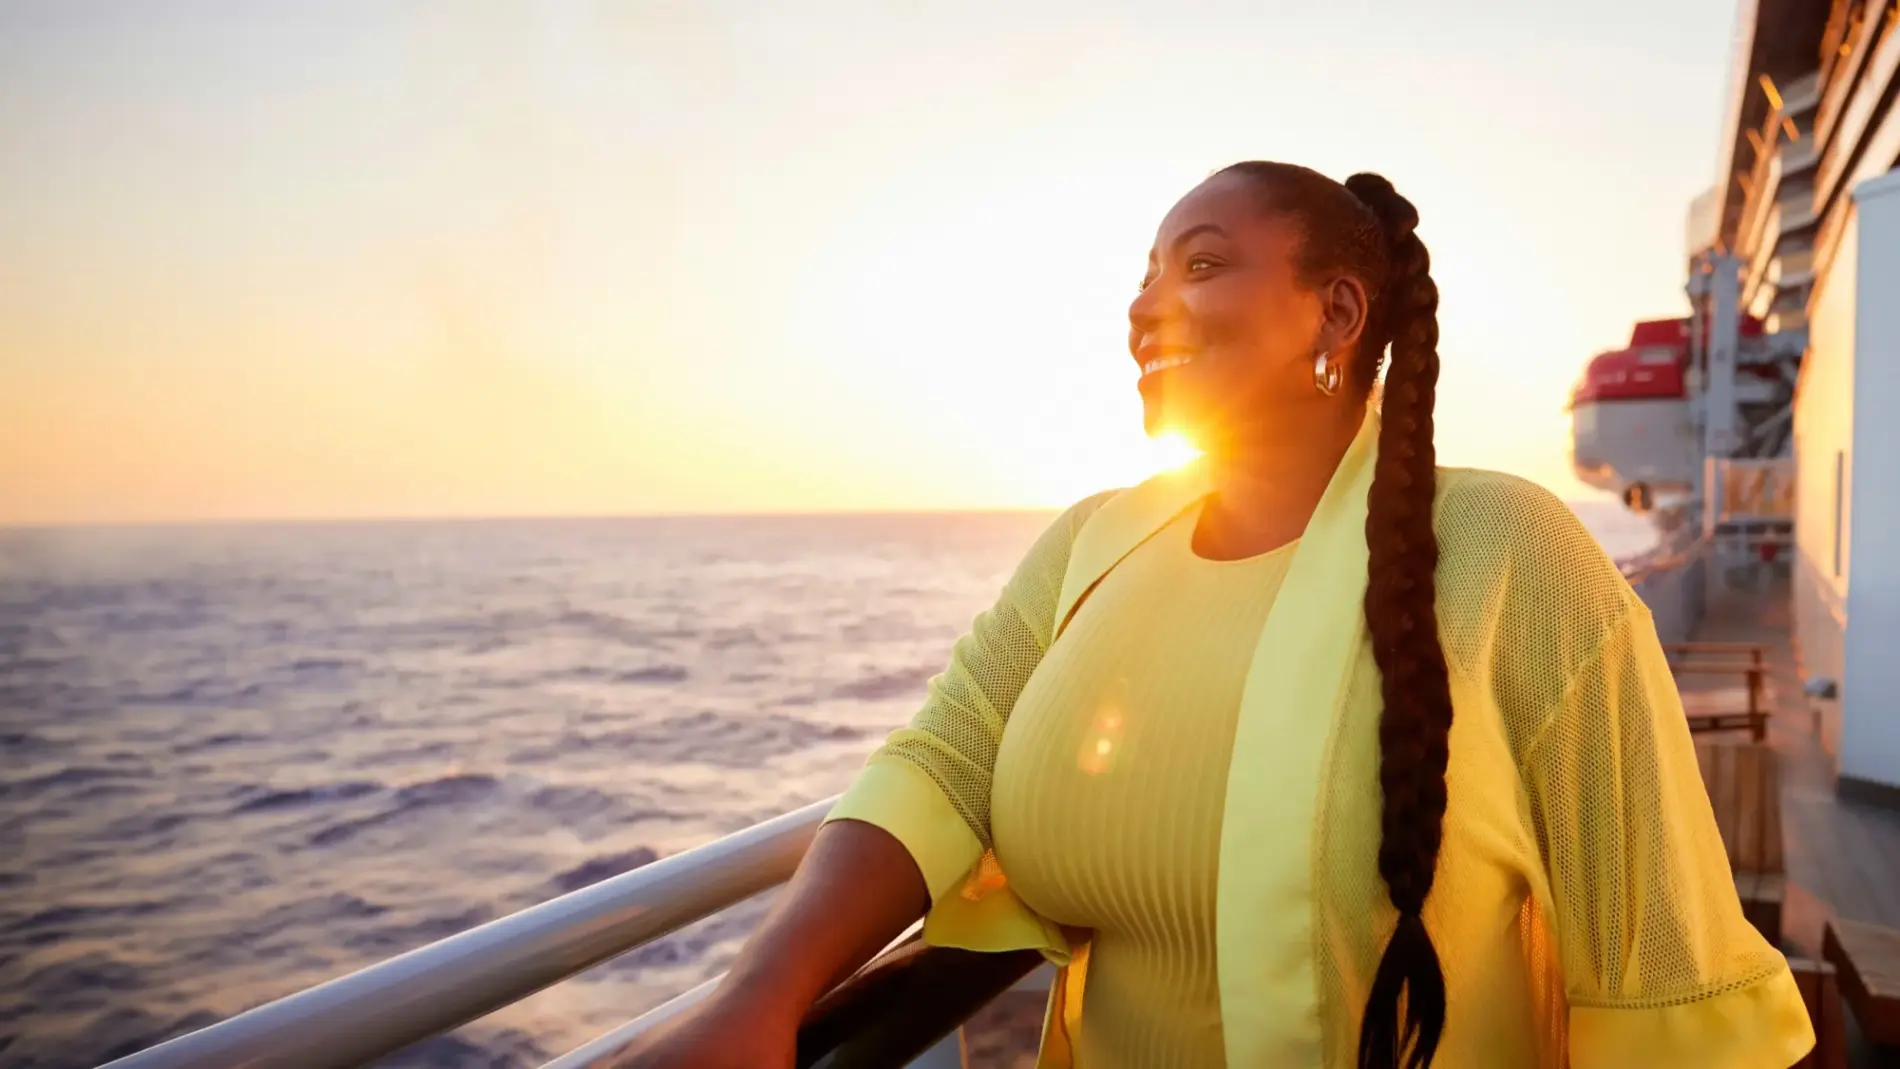 A dark skinned woman with long braided hair smiles in front of a sunset as she stands at the railing of a cruise ship.